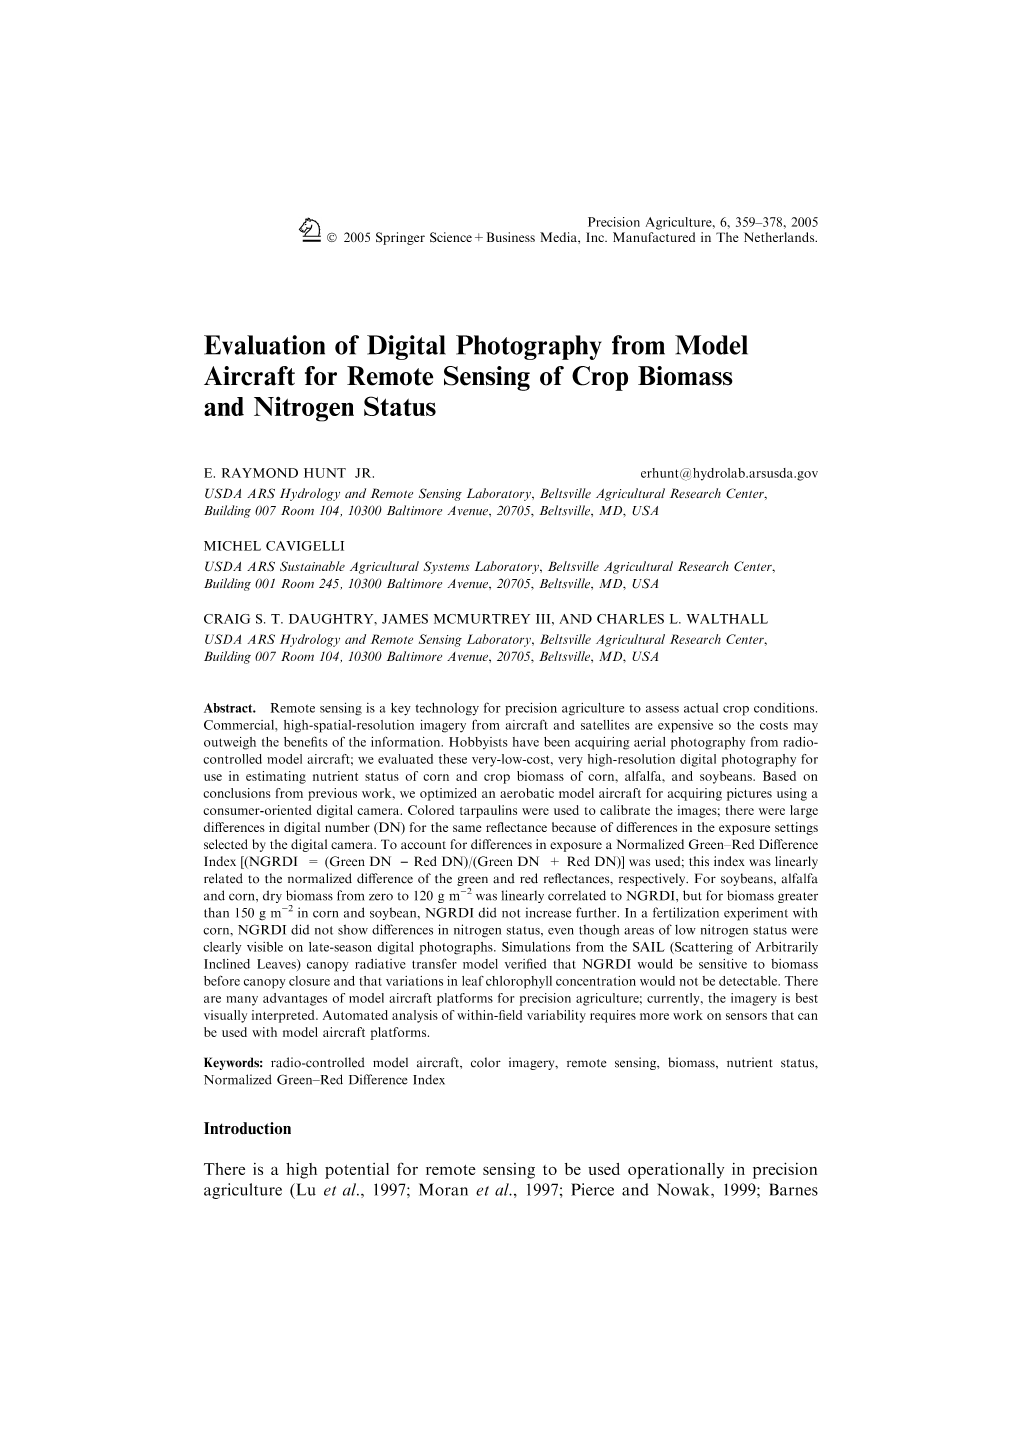 Evaluation of Digital Photography from Model Aircraft for Remote Sensing of Crop Biomass and Nitrogen Status